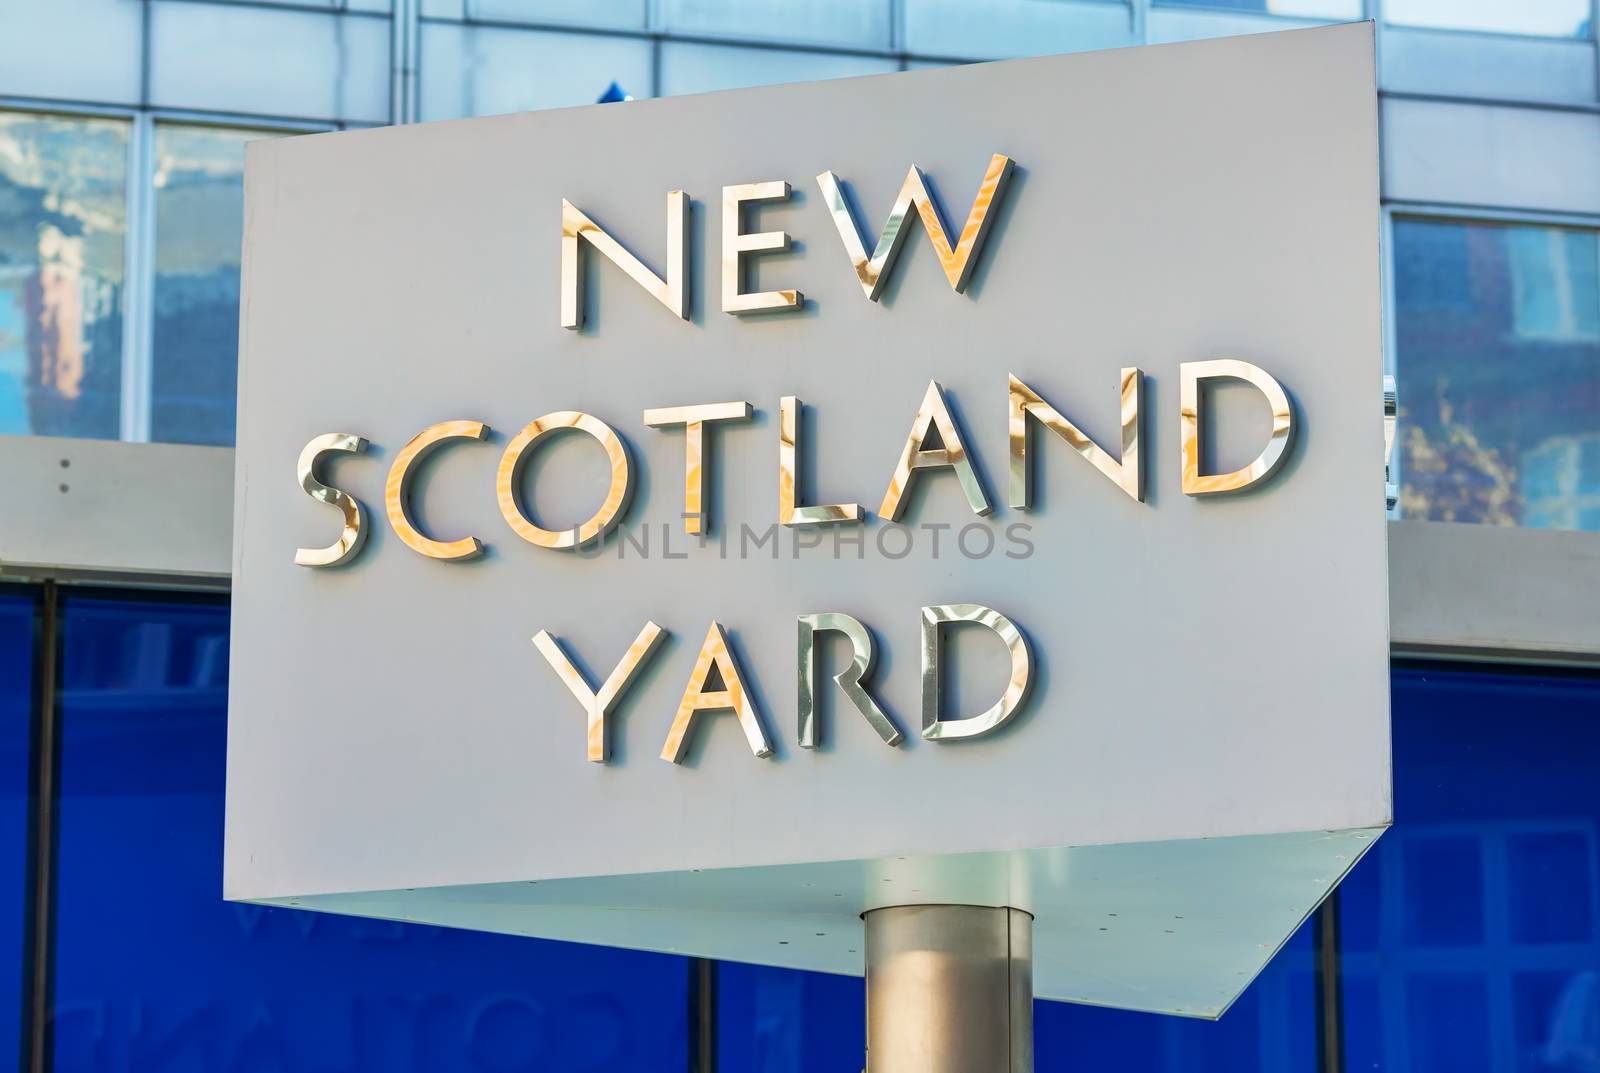 LONDON - APRIL 12: Famous New Scotland Yard sign on April 12, 2015 in London, UK. It's a metonym for the headquarters of the Metropolitan Police Service, the territorial police force of London.